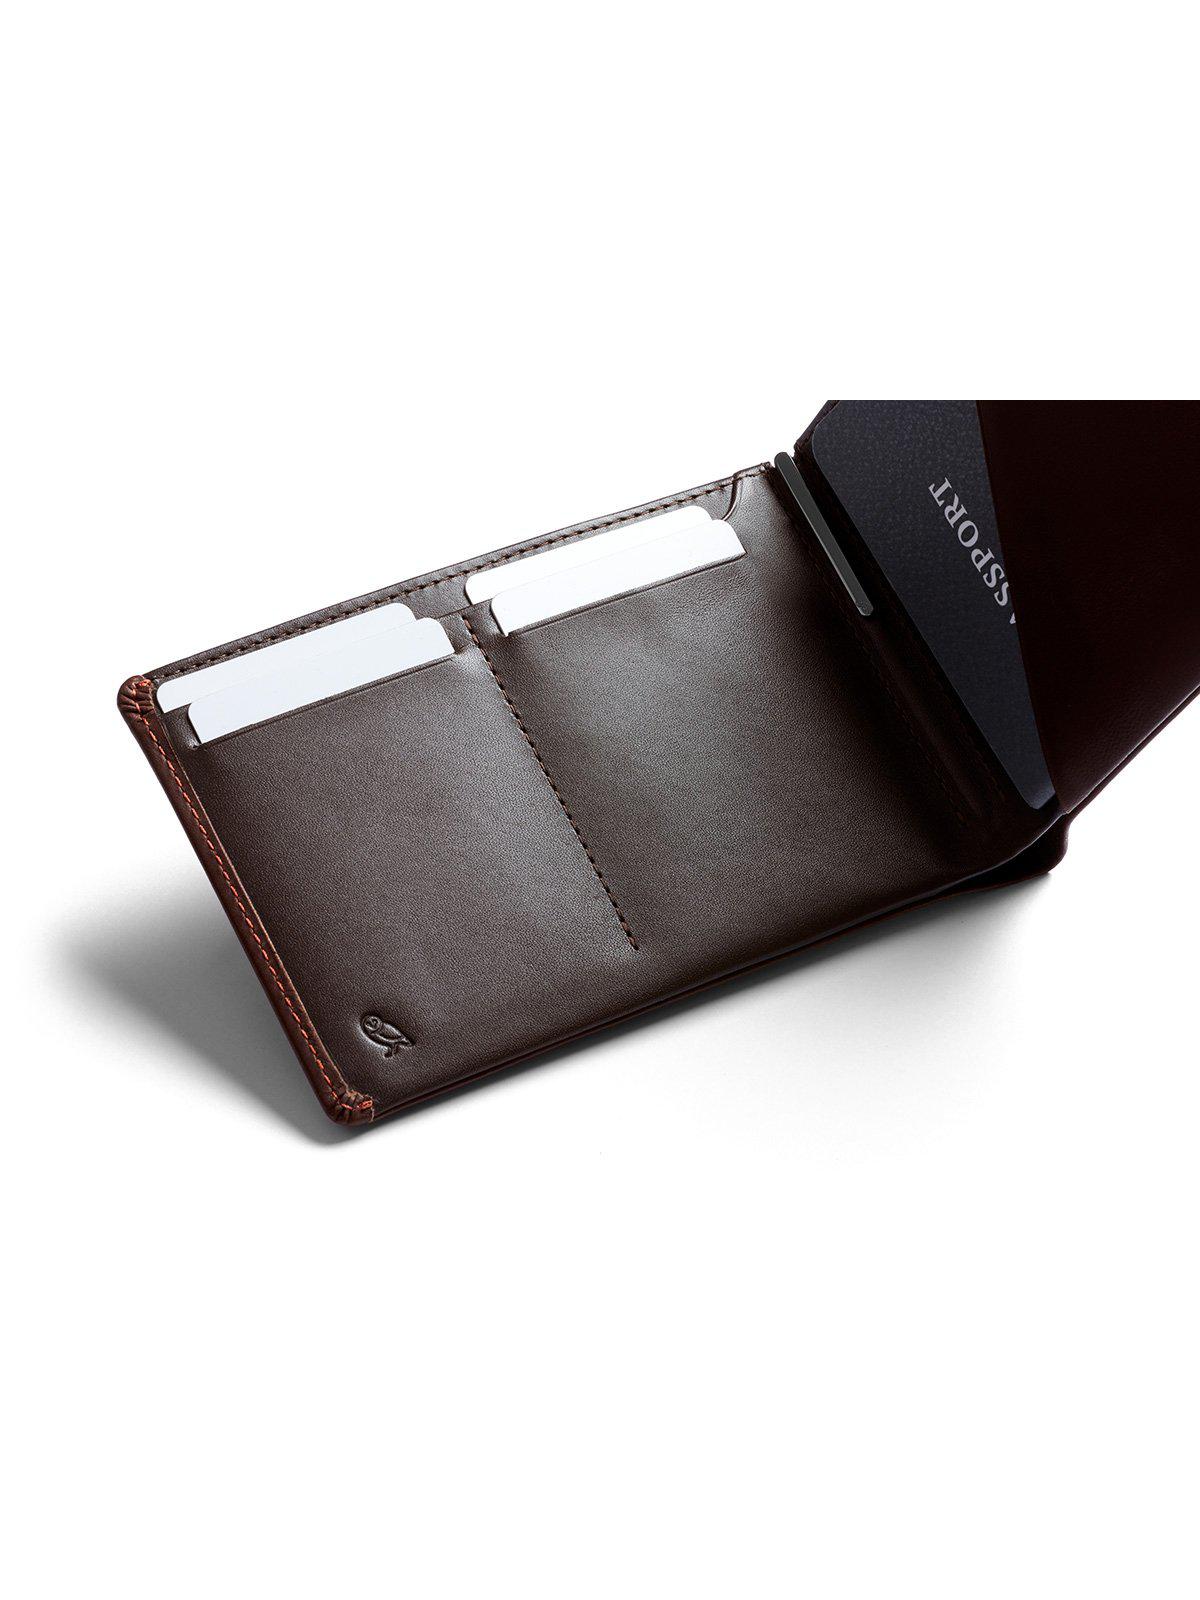 Bellroy Travel Wallet Cocoa RFID - MORE by Morello Indonesia